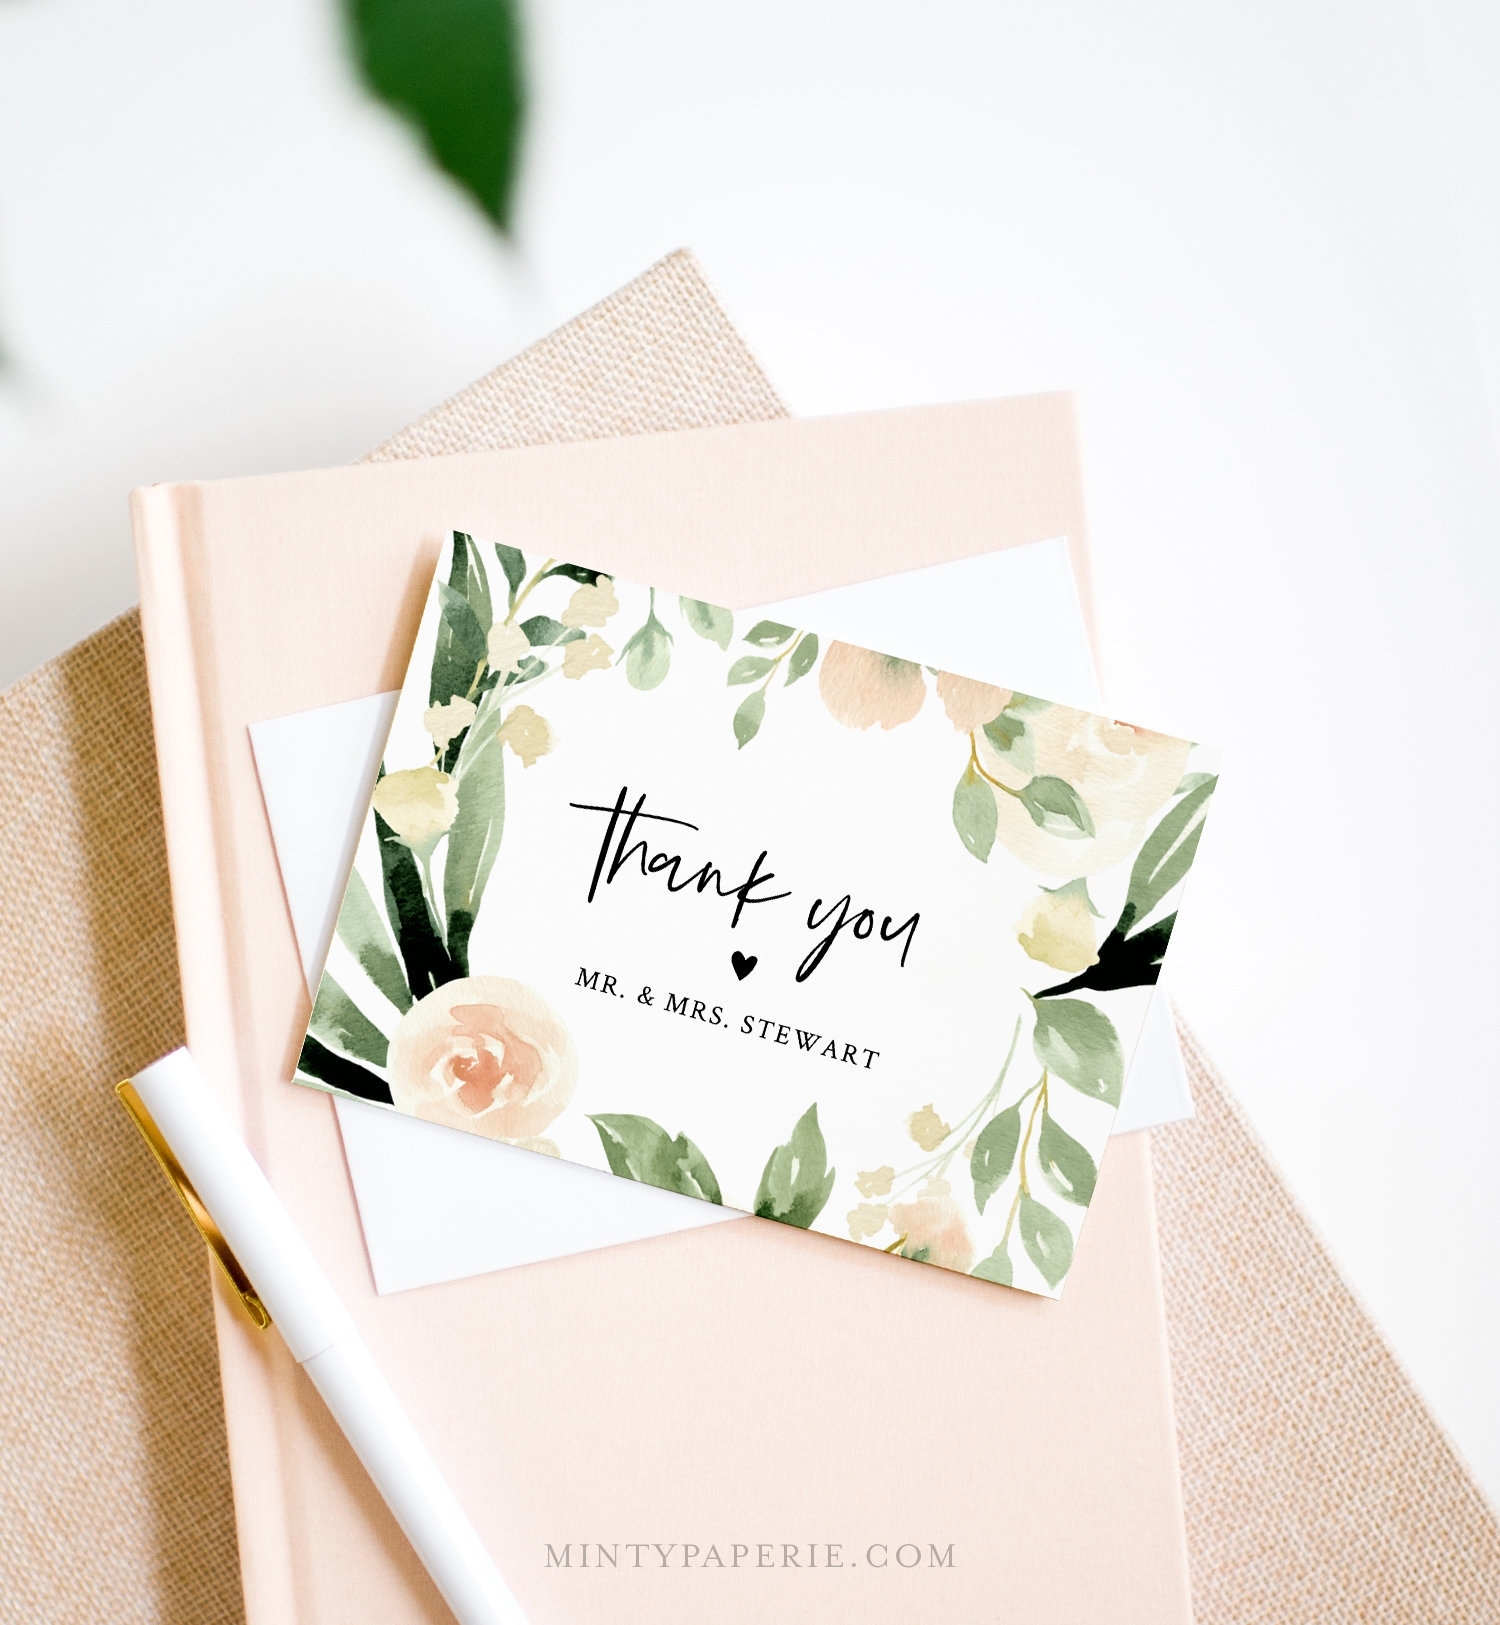 Thank You Card Template, Printable Peach Florals Wedding / Bridal Inside Template For Wedding Thank You Cards